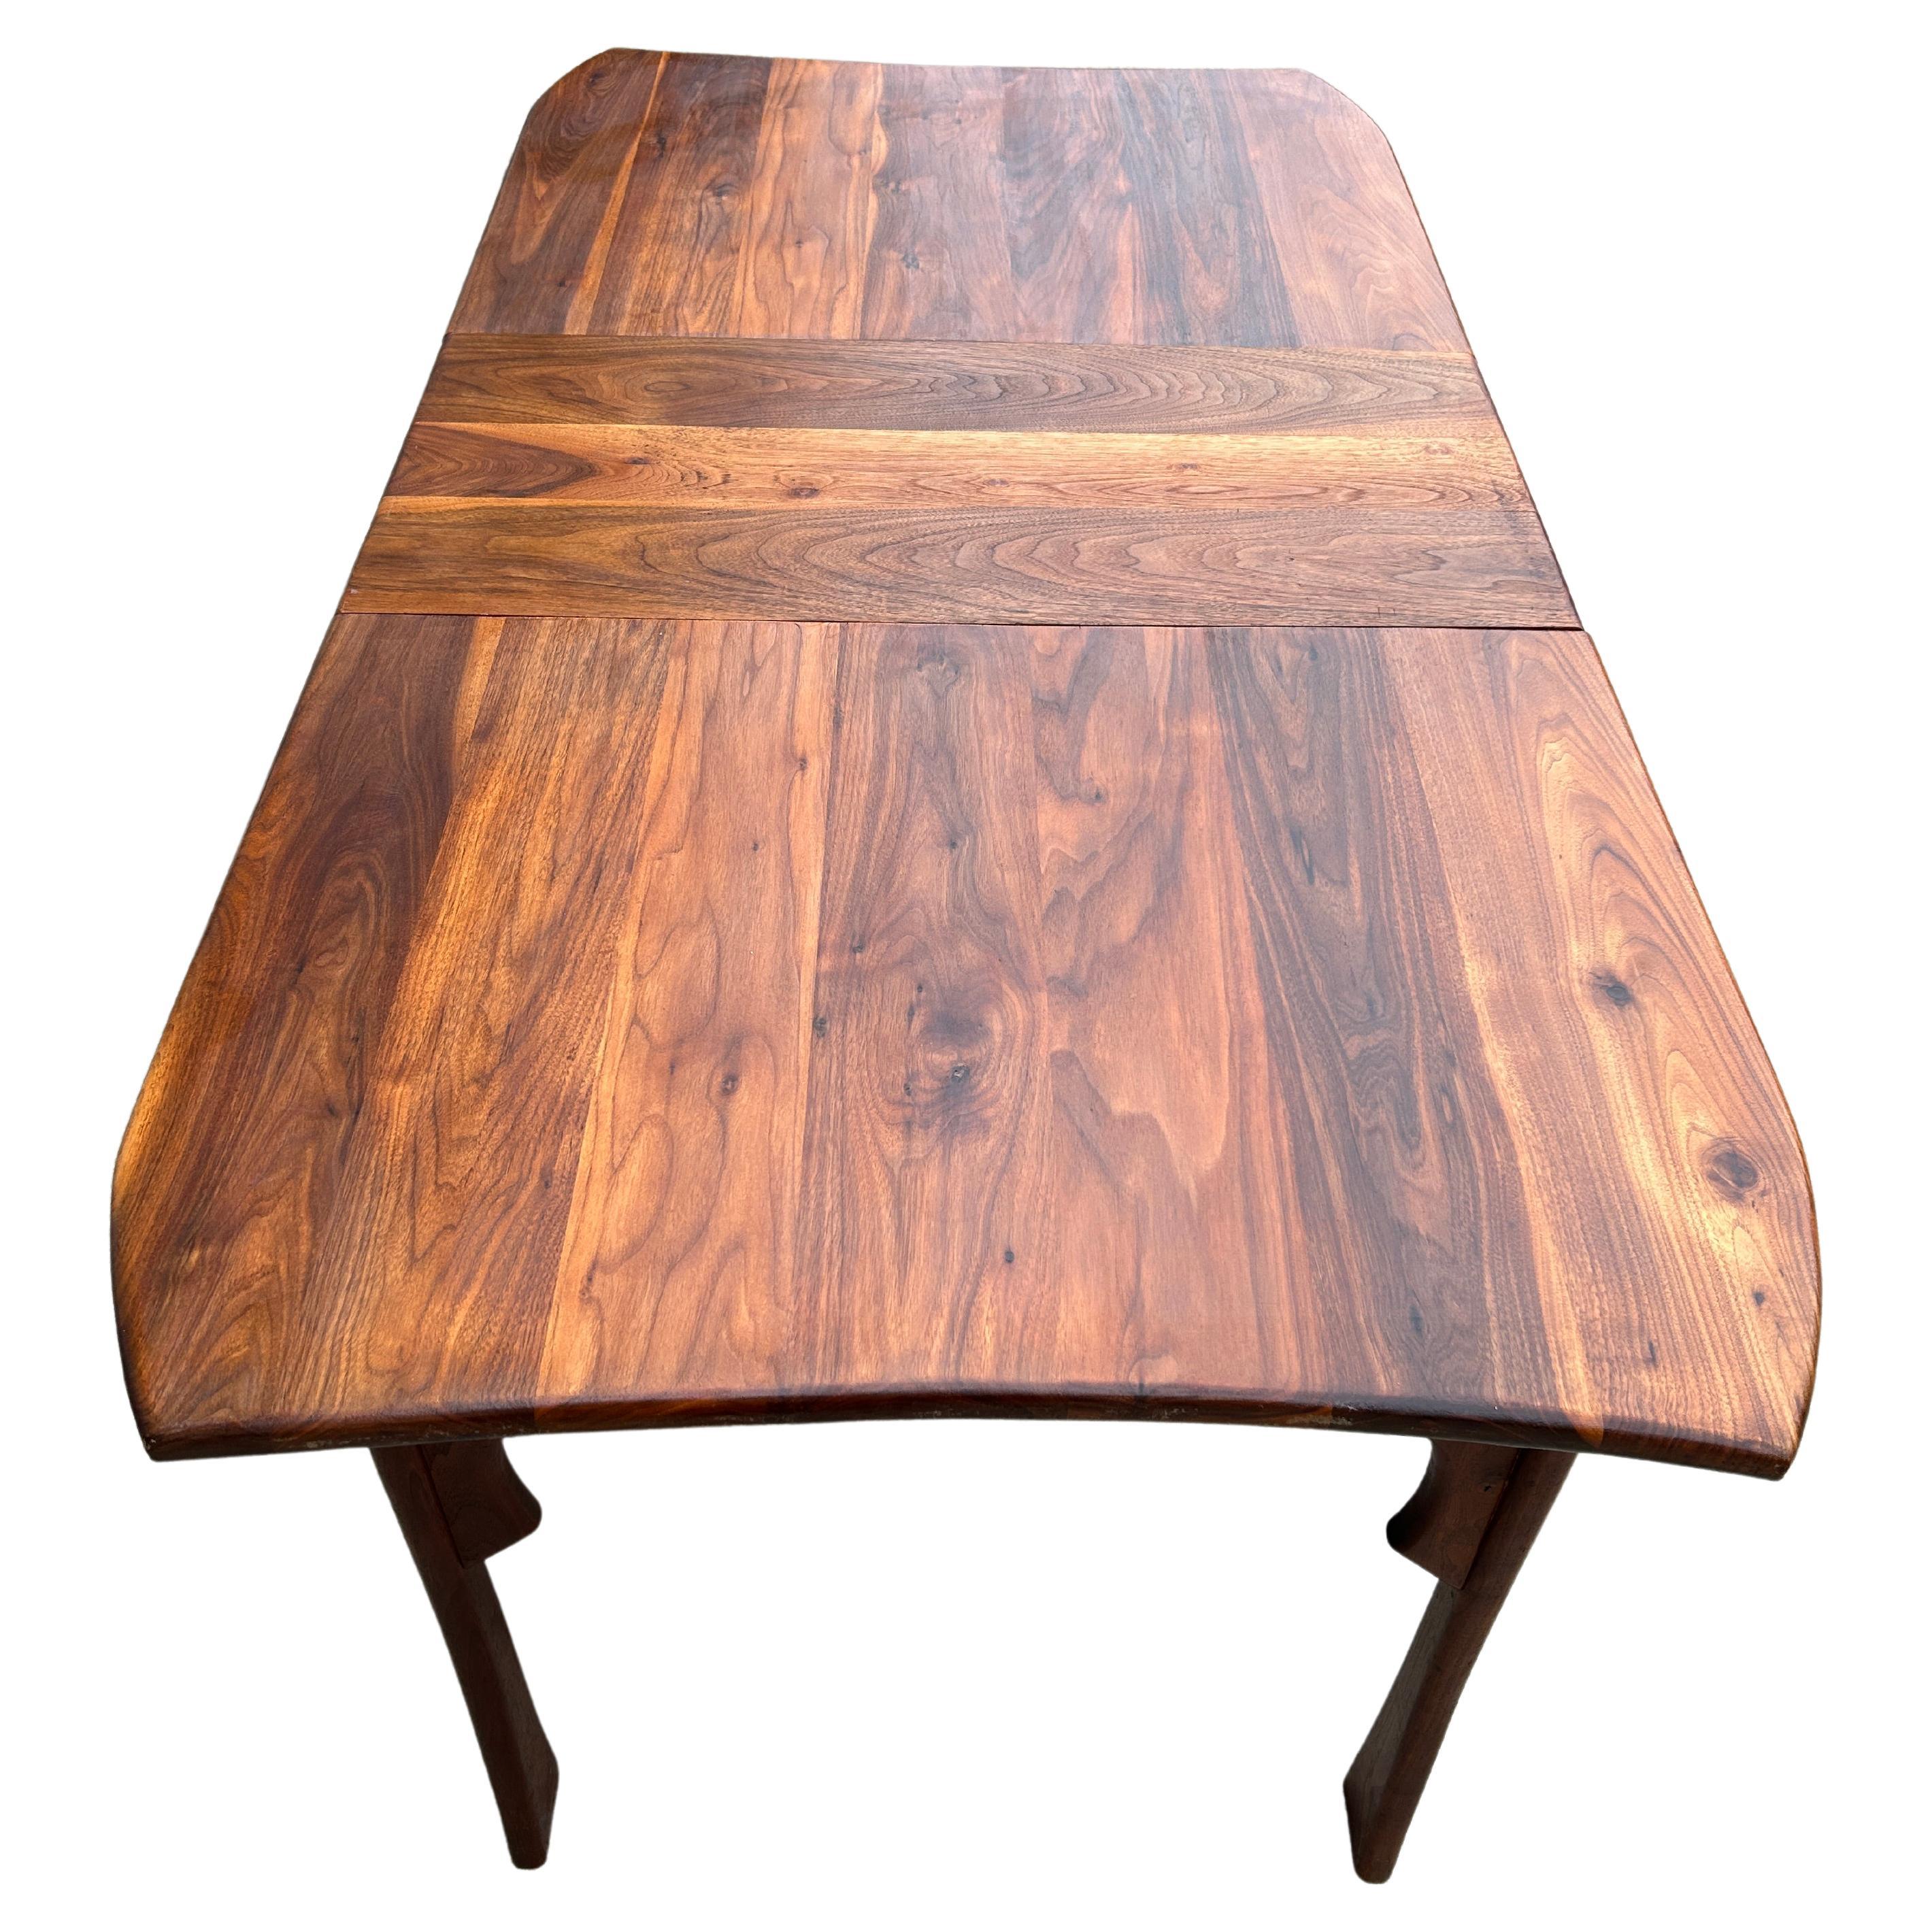 20th Century American Studio Craft solid Walnut Dining Table Style of Wharton Esherick For Sale